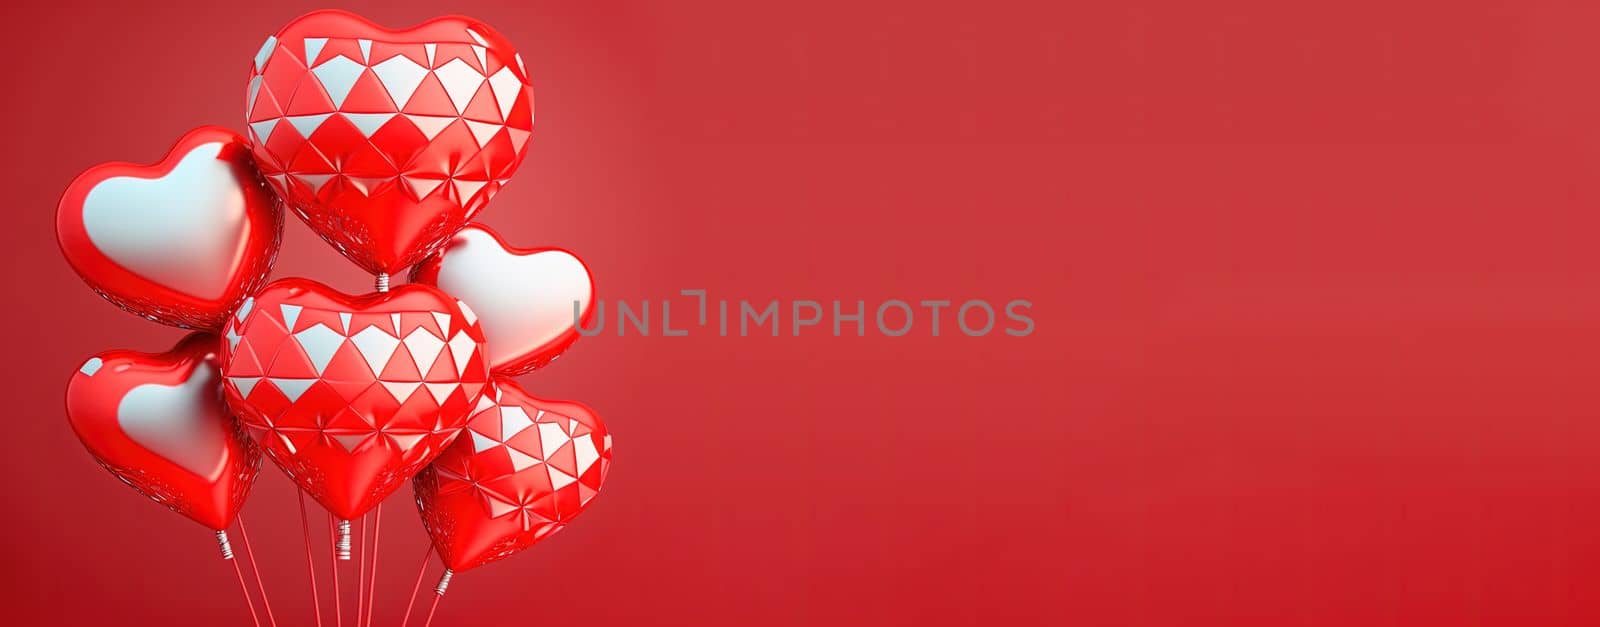 Bright red 3D heart shape on a happy Valentine's Day banner background